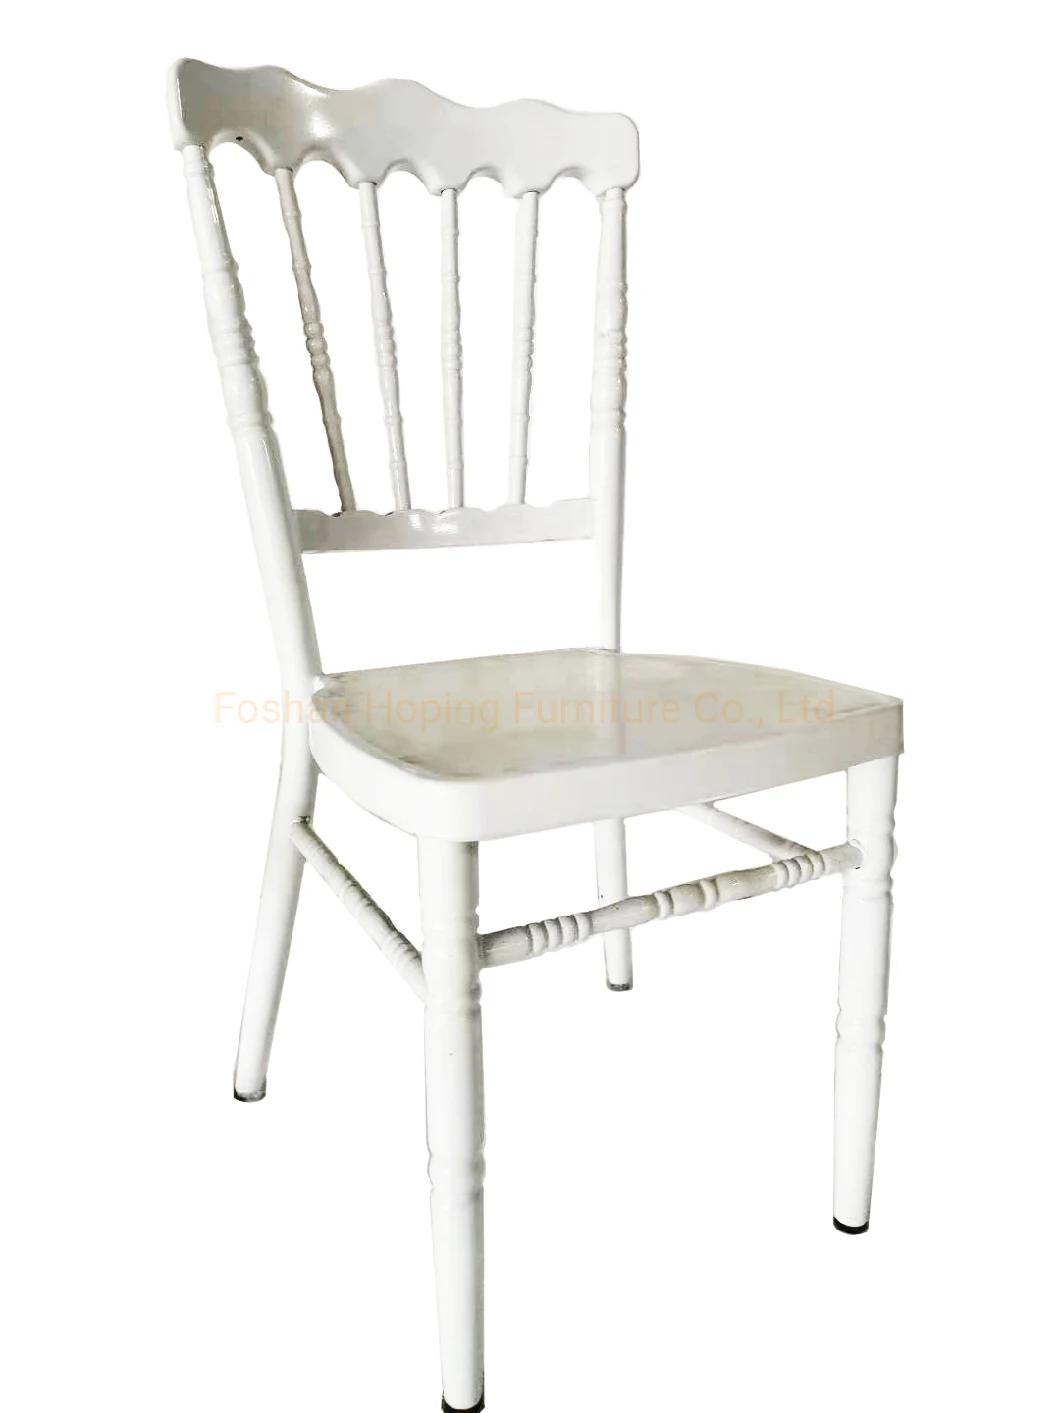 Plated Gold Chairs Powder Silver and Gold Chaircheap Colored Popular Wedding Reticulation Cross Back Chair Dining Room Steel Furniture